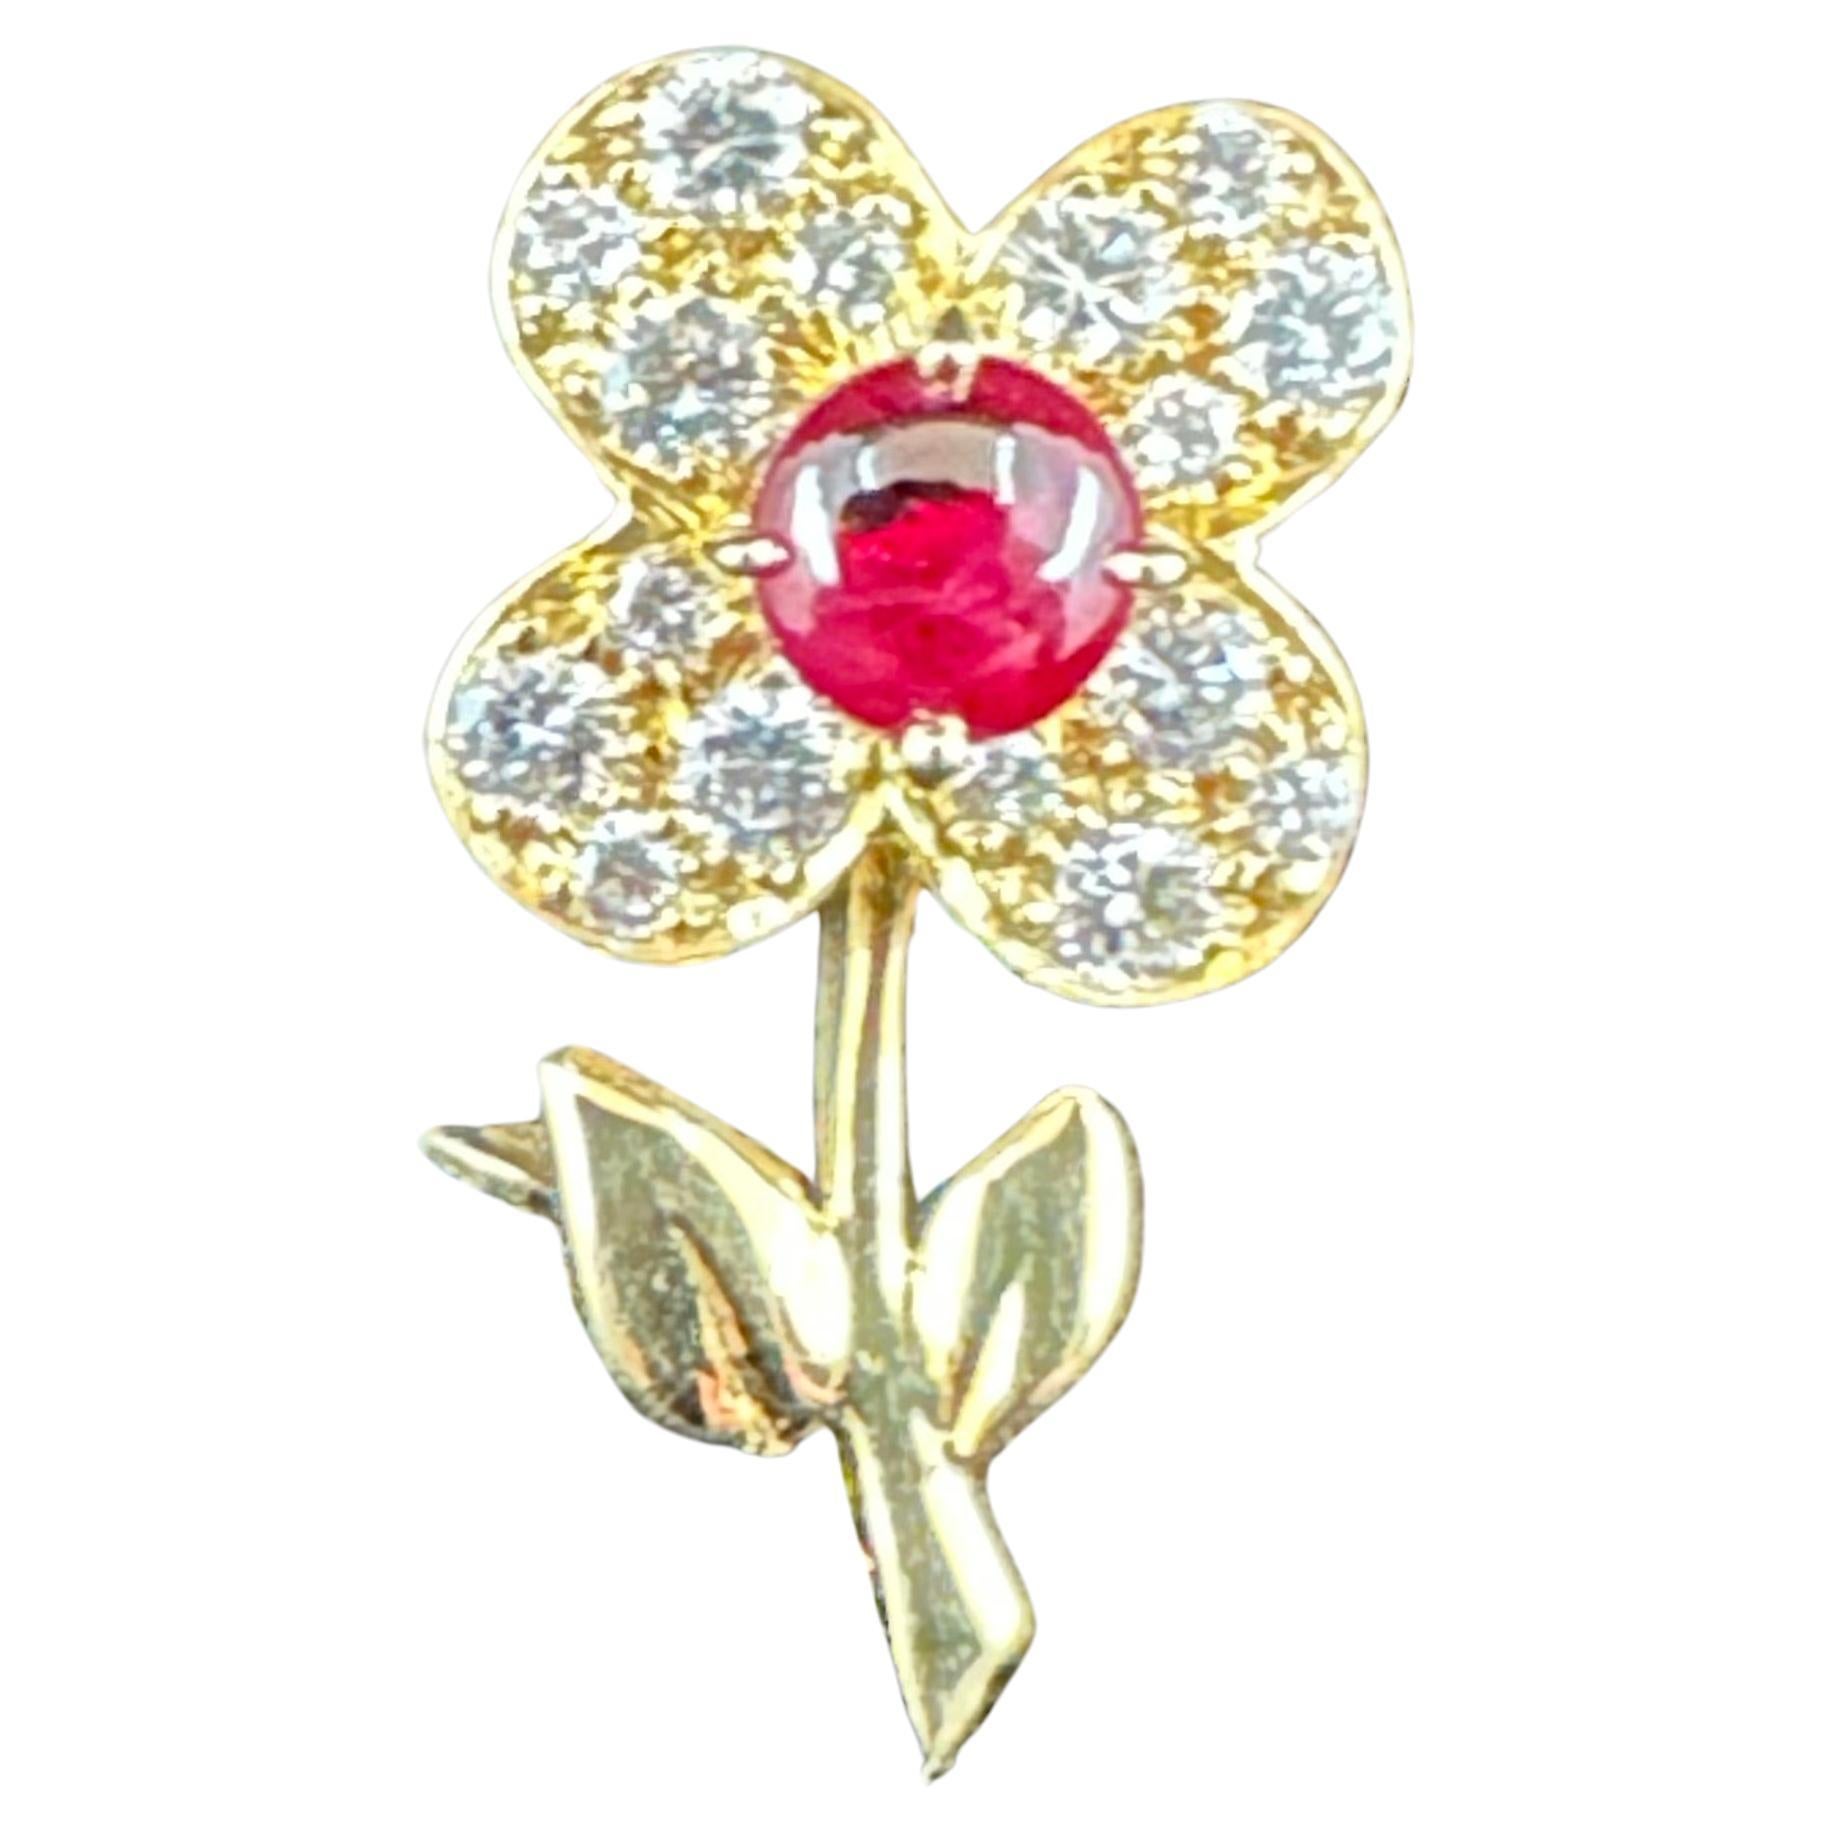 Van Cleef & Arpels Ruby Diamond Pin 18k Yellow Gold For Sale